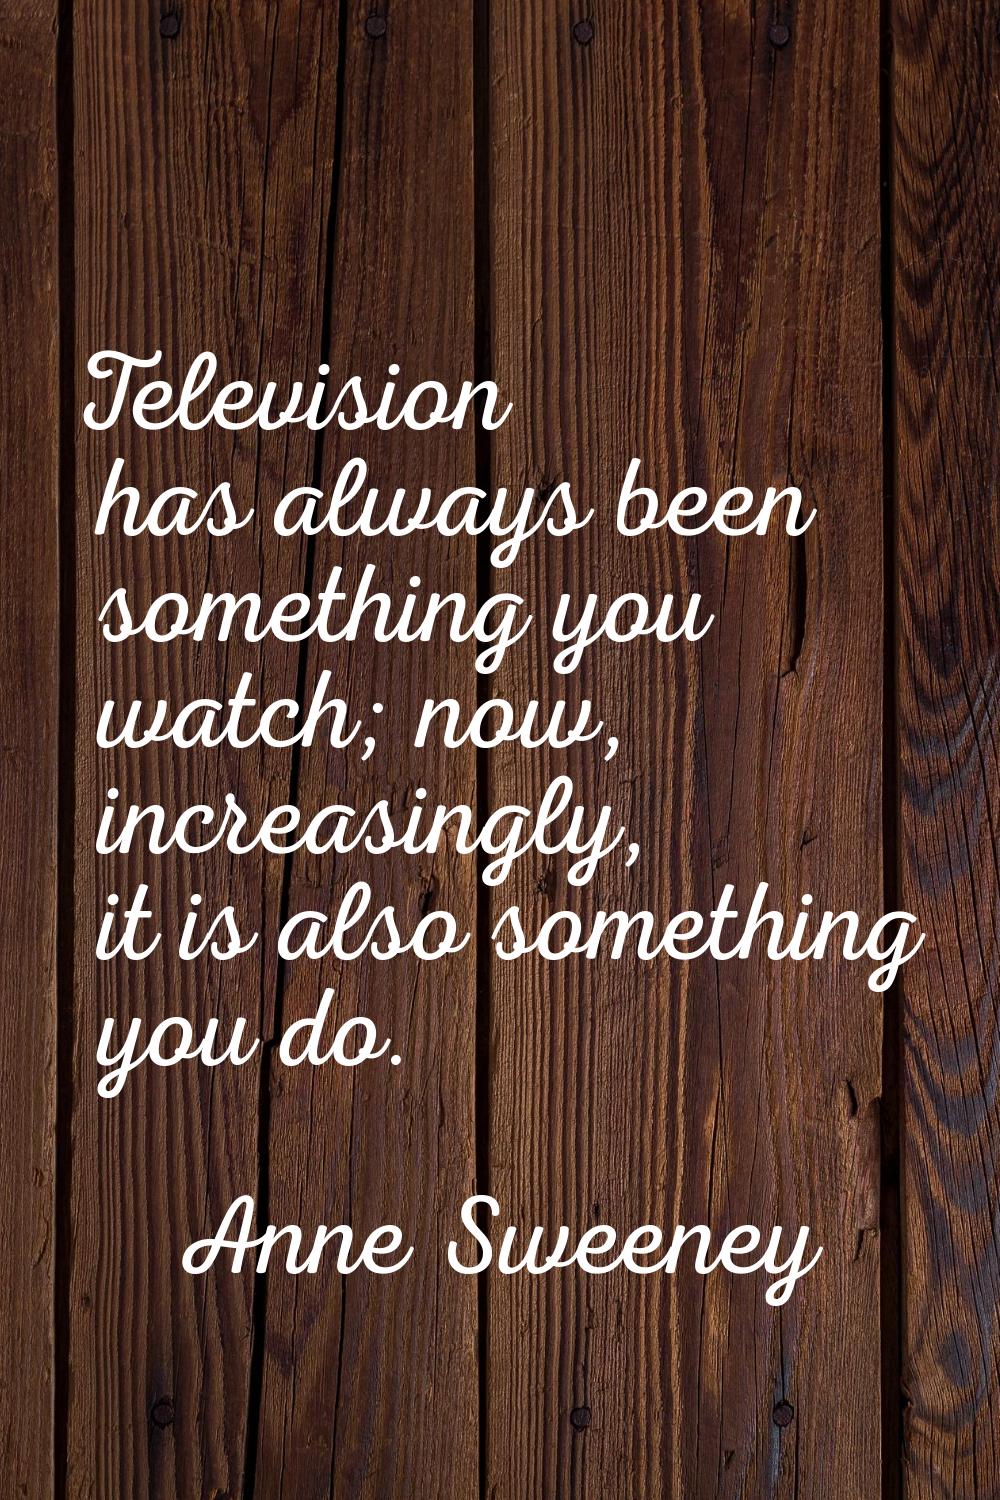 Television has always been something you watch; now, increasingly, it is also something you do.